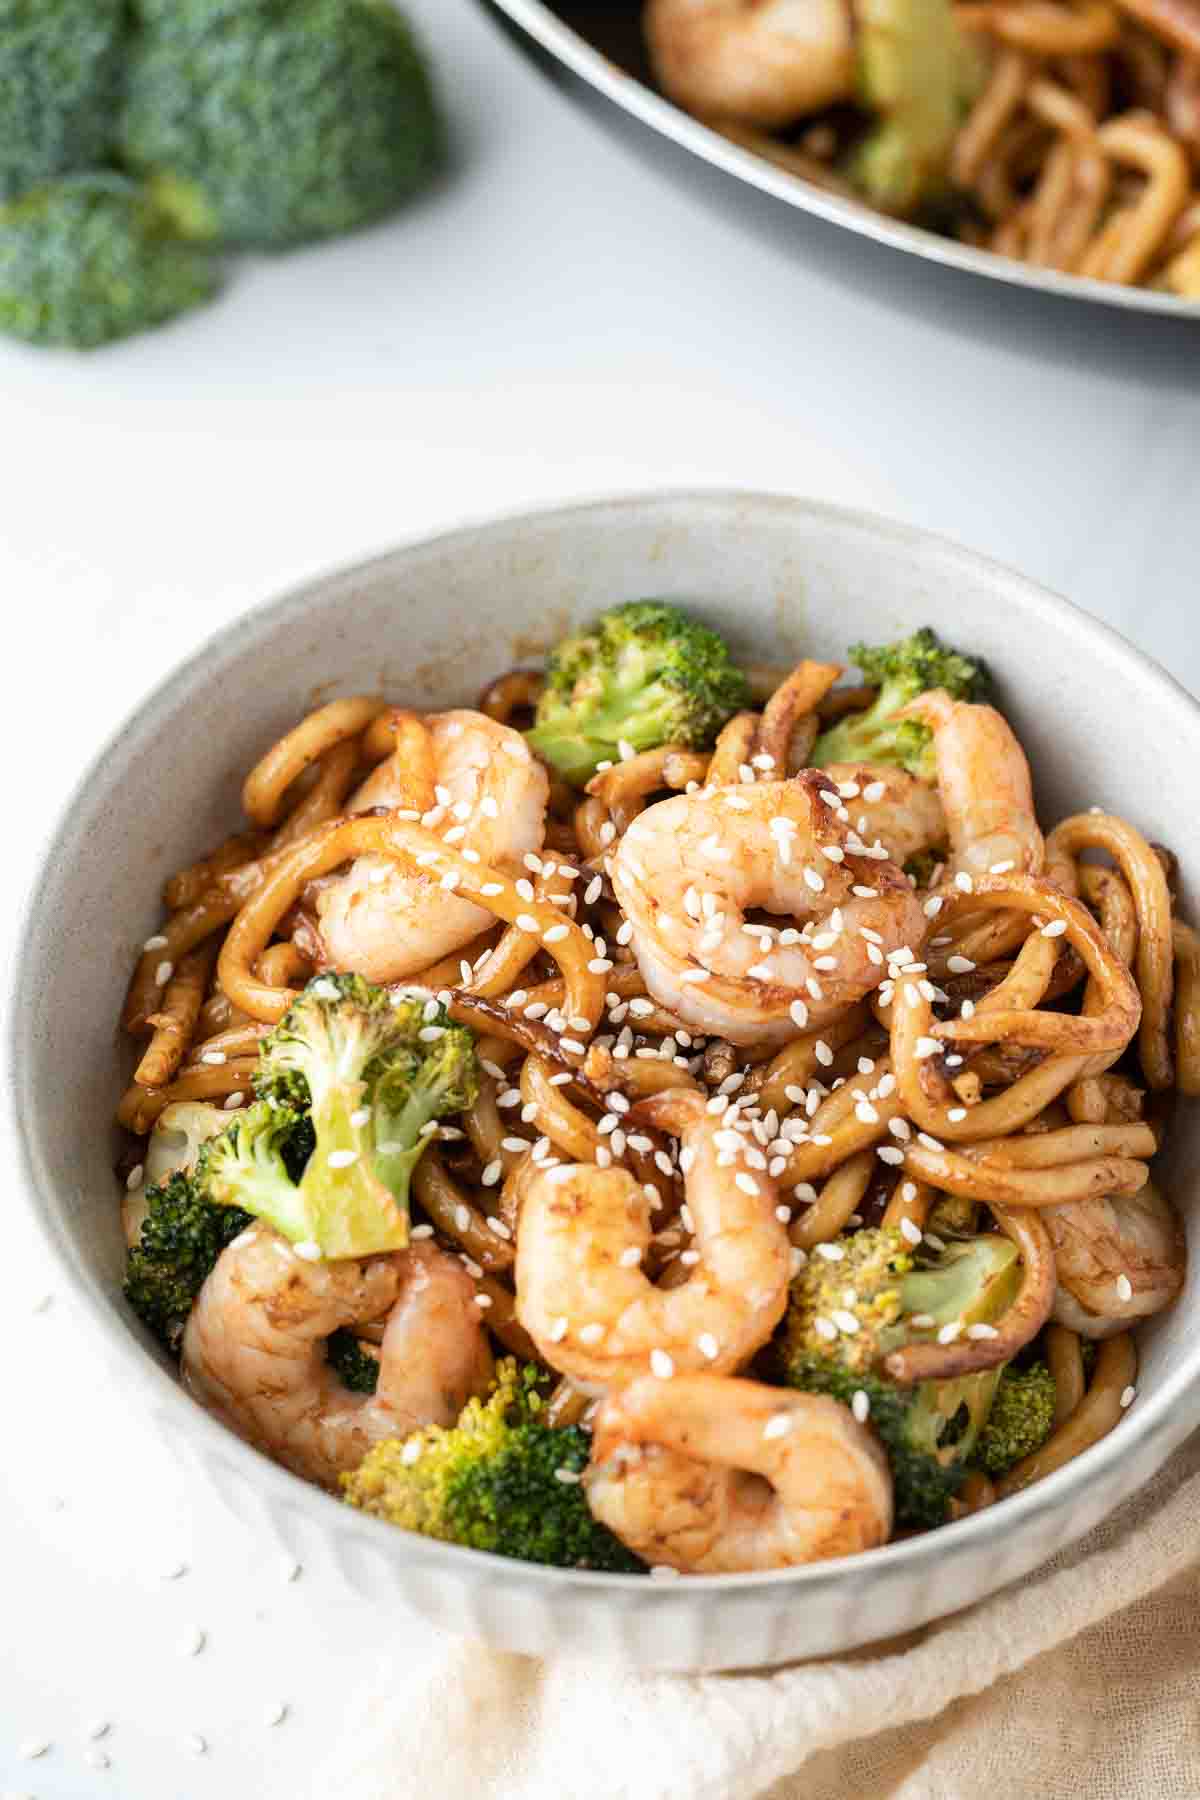 Garlic prawn noodles with sesame seeds in a white bowl.